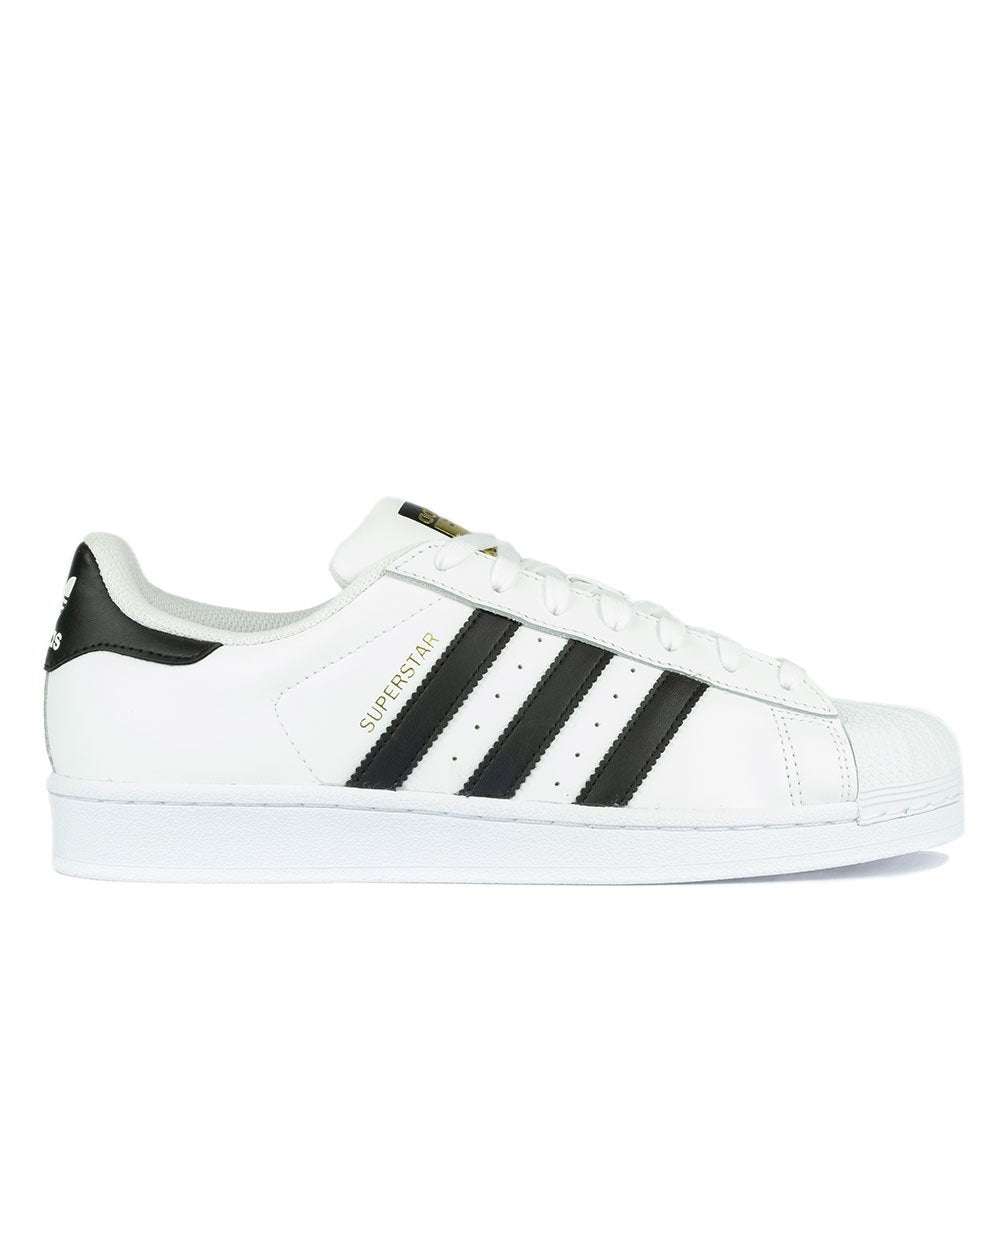 Adidas Superstar White and Black